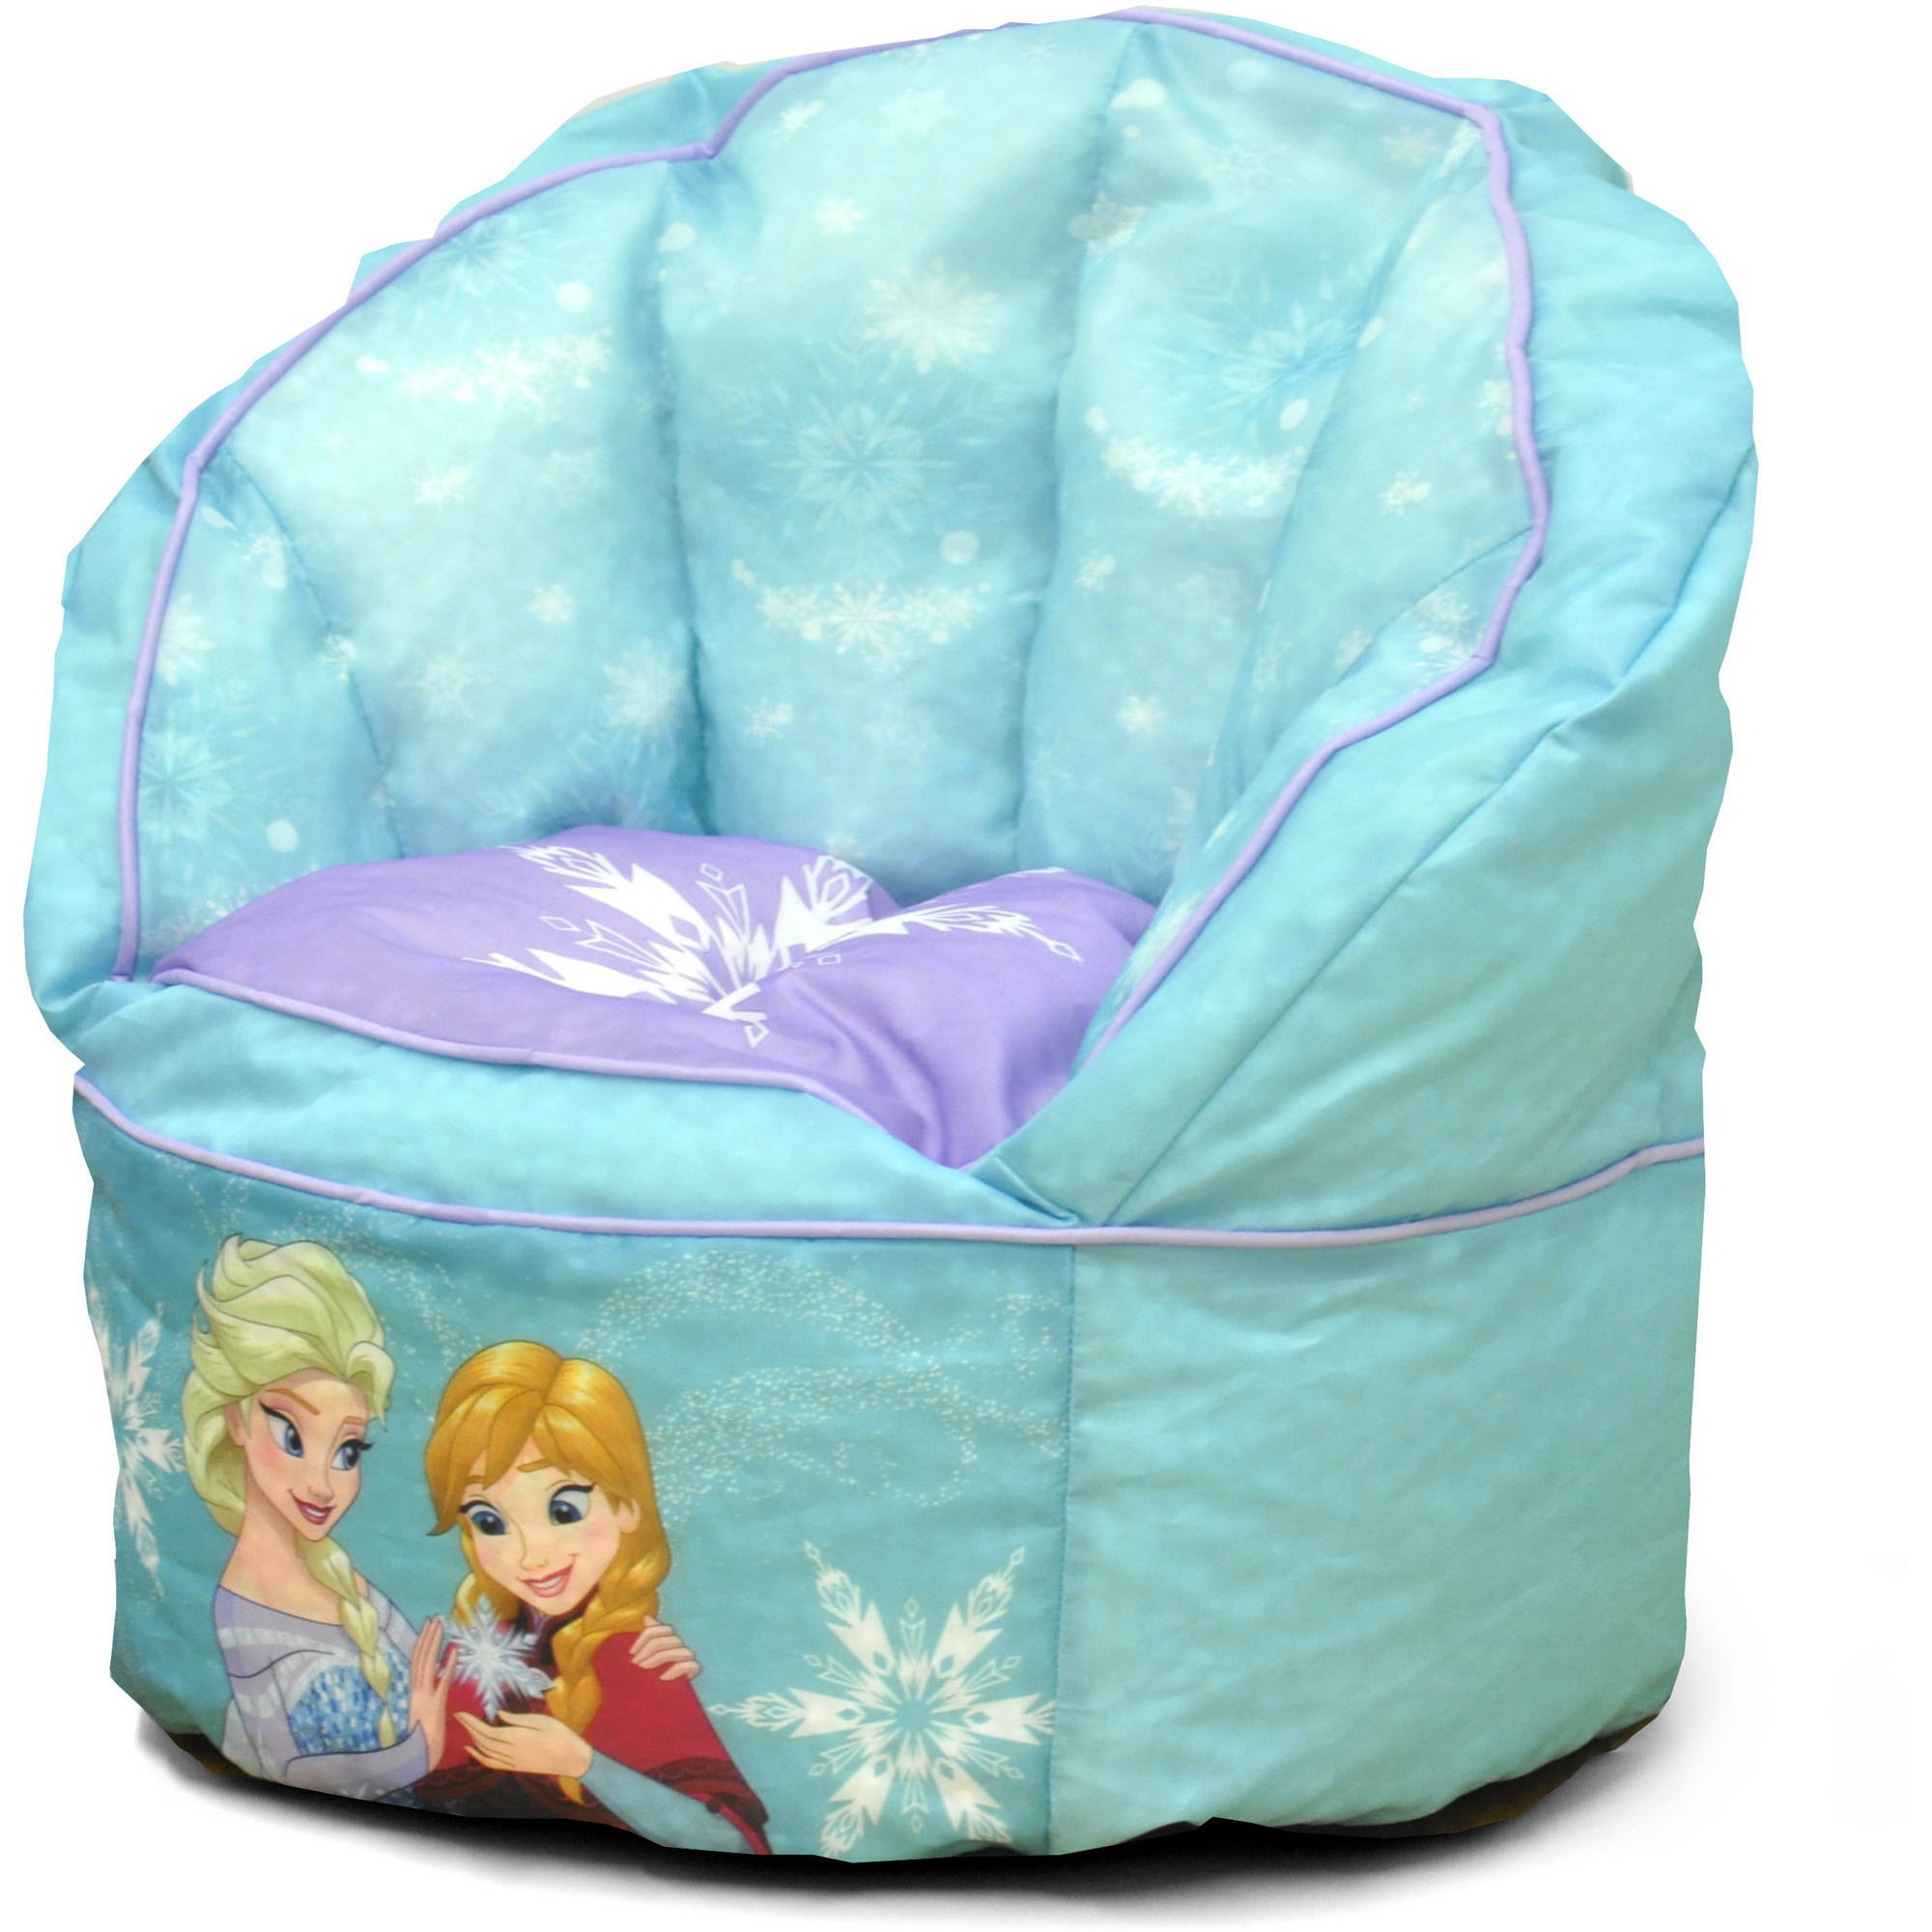 Disney Frozen Sofa Bean Bag Chair with Piping - image 1 of 2